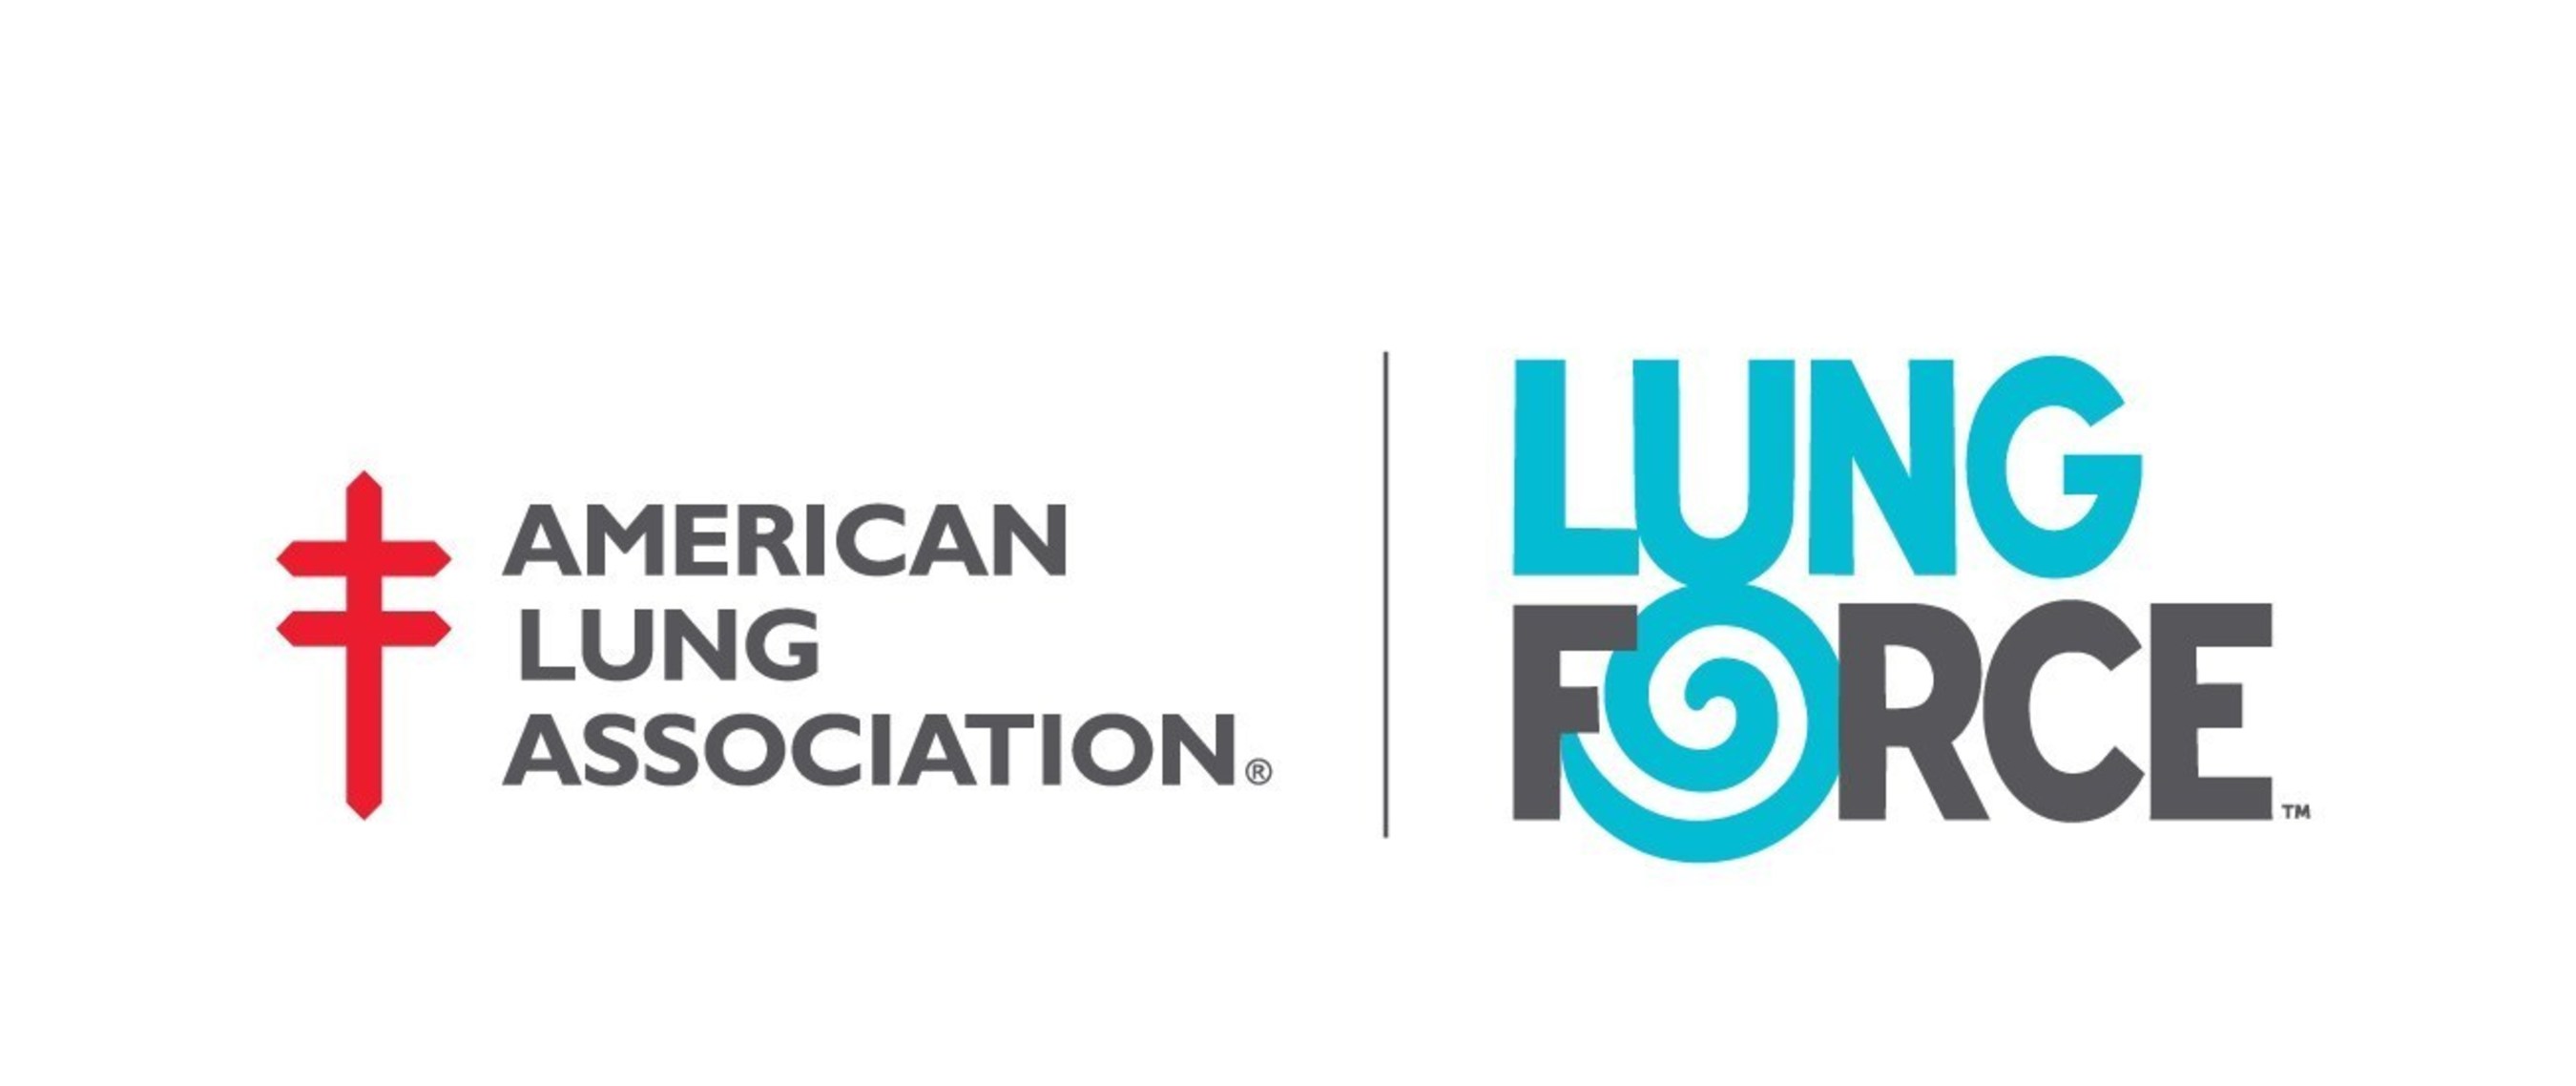 American Lung Association & LUNG FORCE Logo